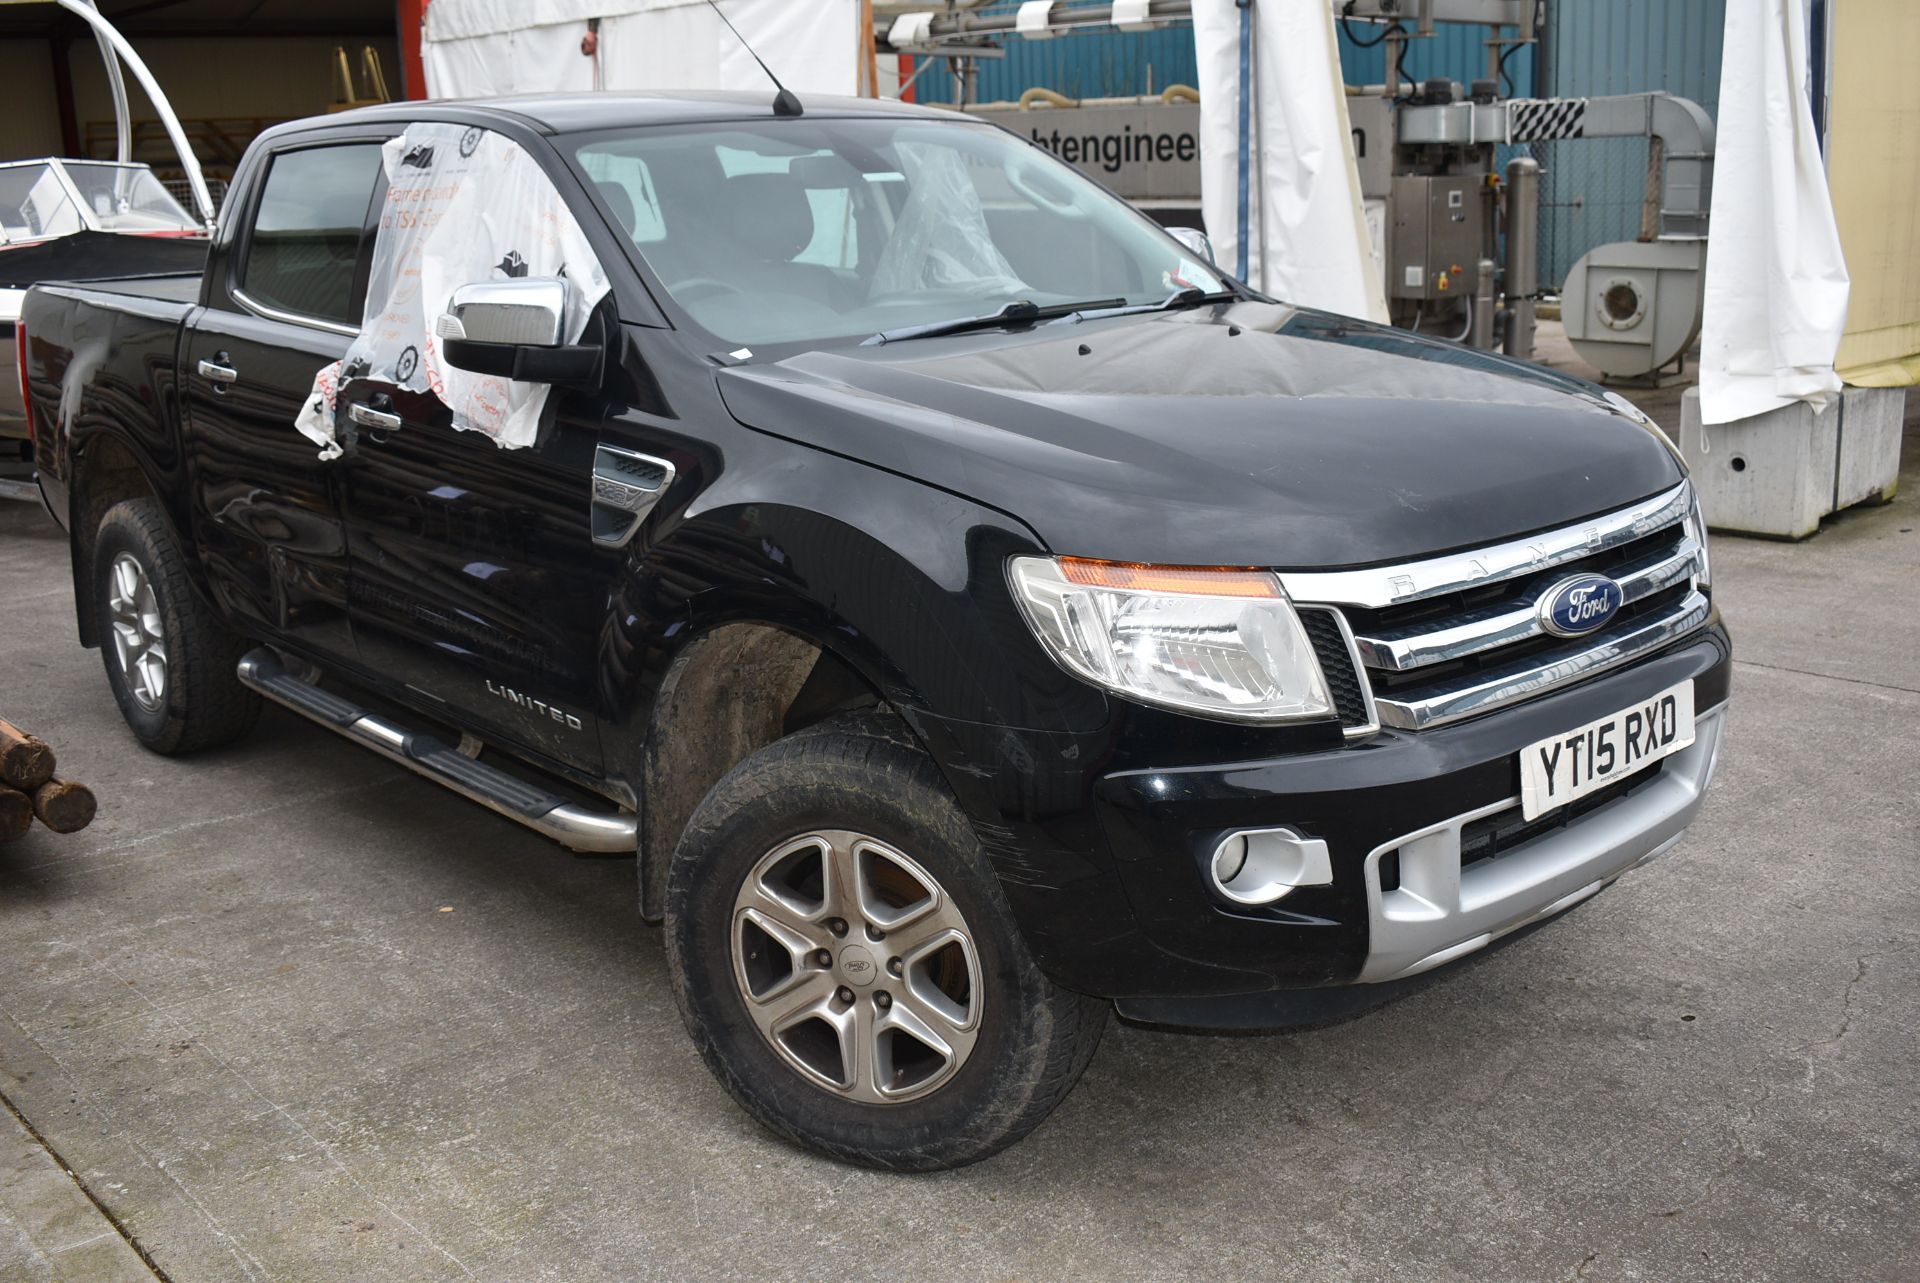 *Ford Ranger Reg: YT15 RXD (with faults)